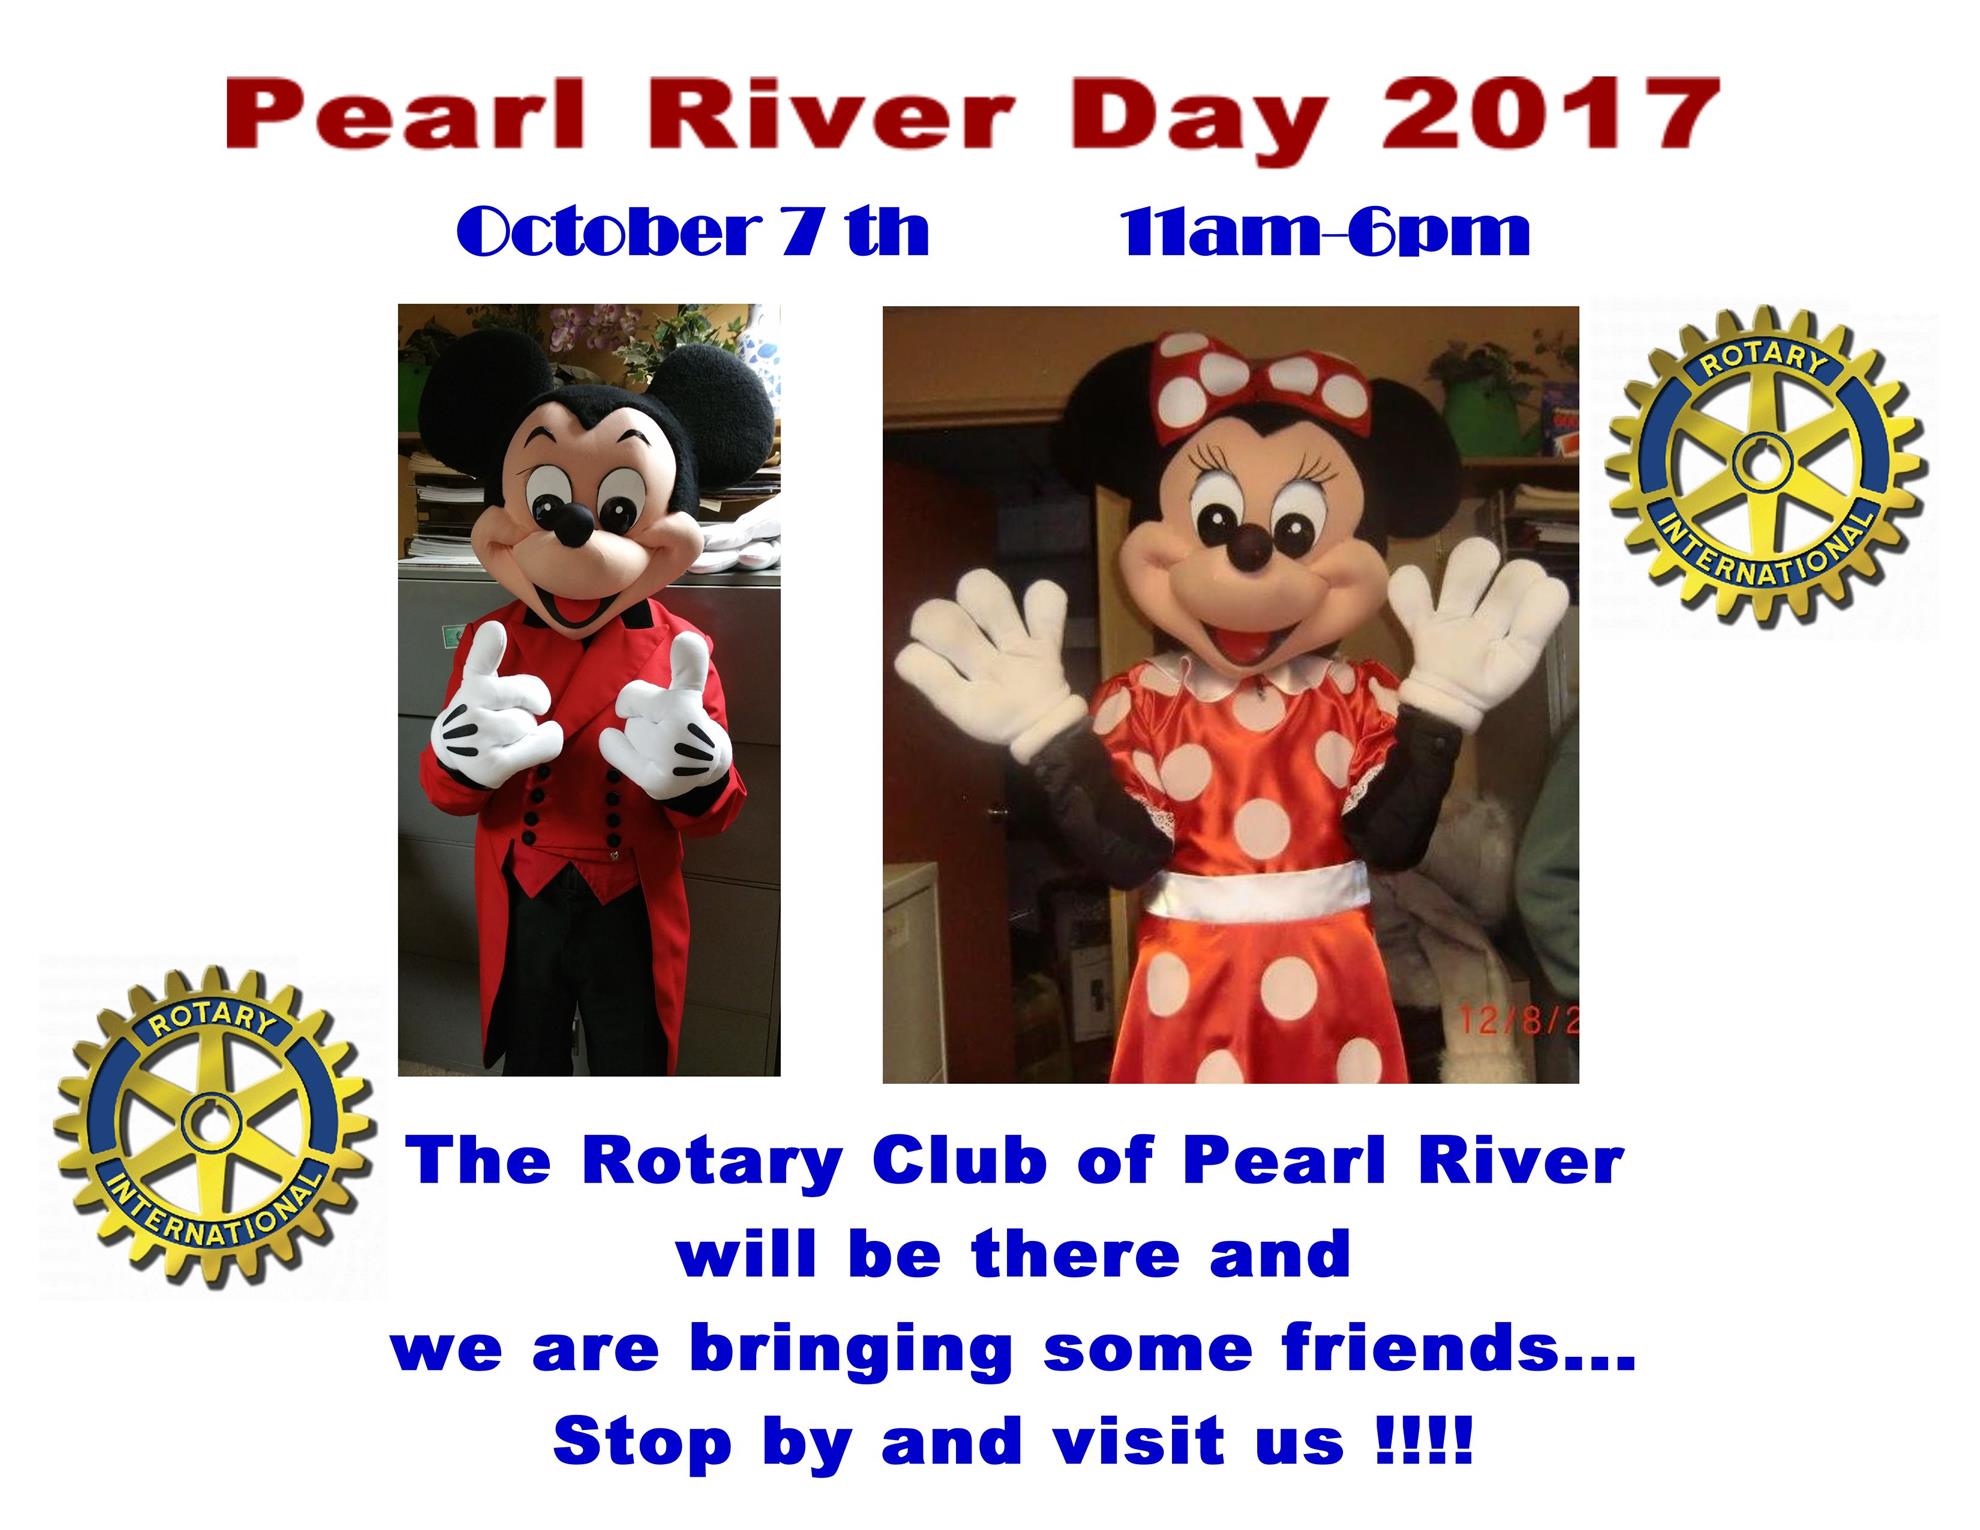 Pearl River Day Rotary Club of Pearl River